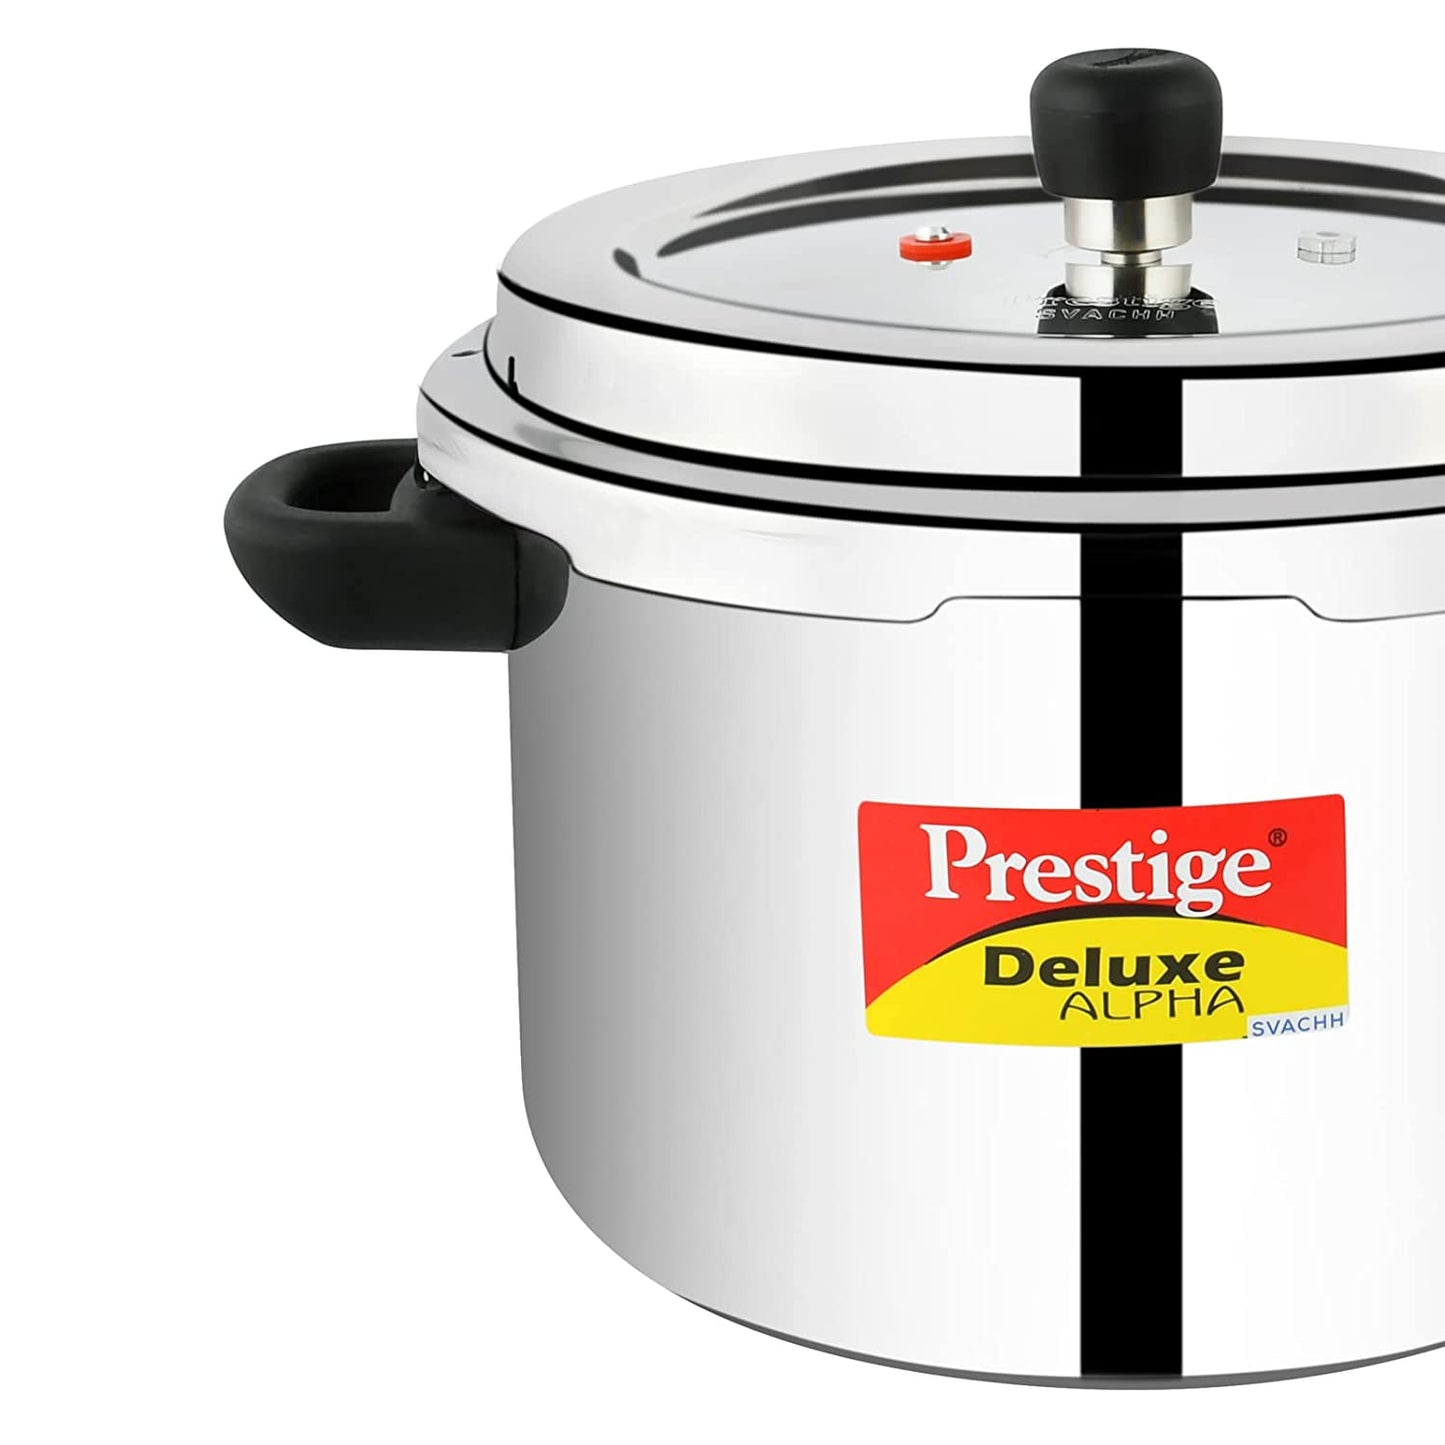 Prestige Svachh Deluxe Alpha 6.5 Litre Stainless Steel Outer Lid Pressure Cooker - 20252